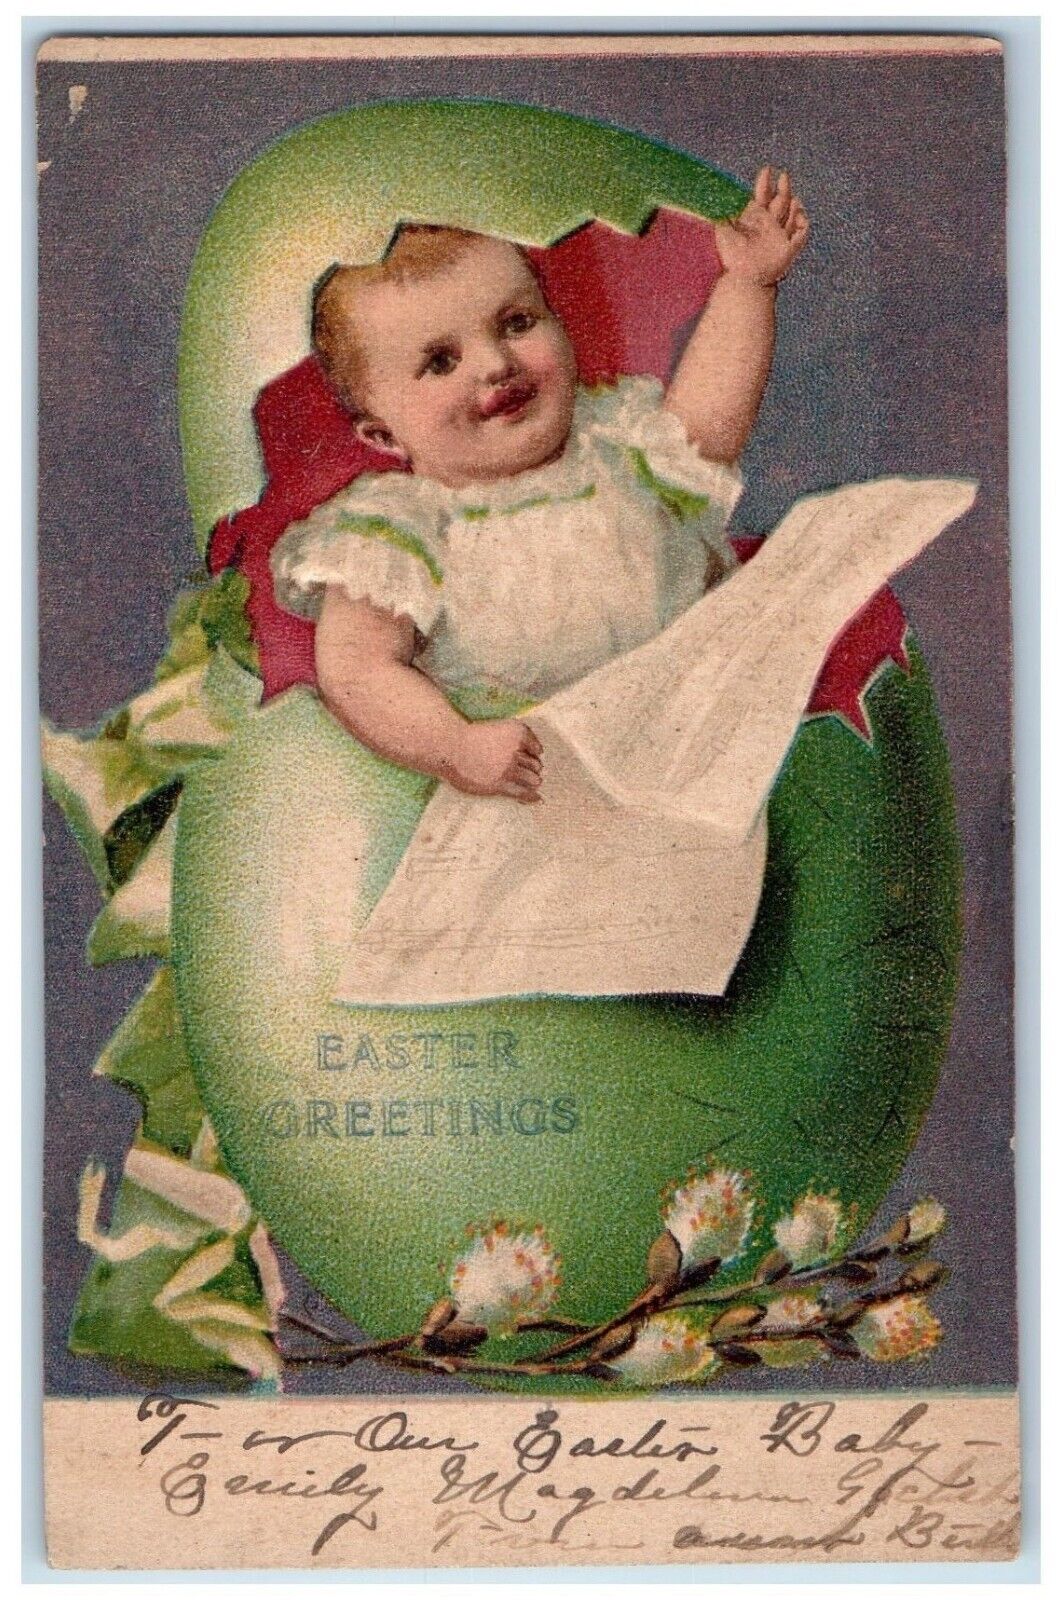 c1910's Easter Greetings Baby In Giant Hatched Egg Embossed Antique Postcard